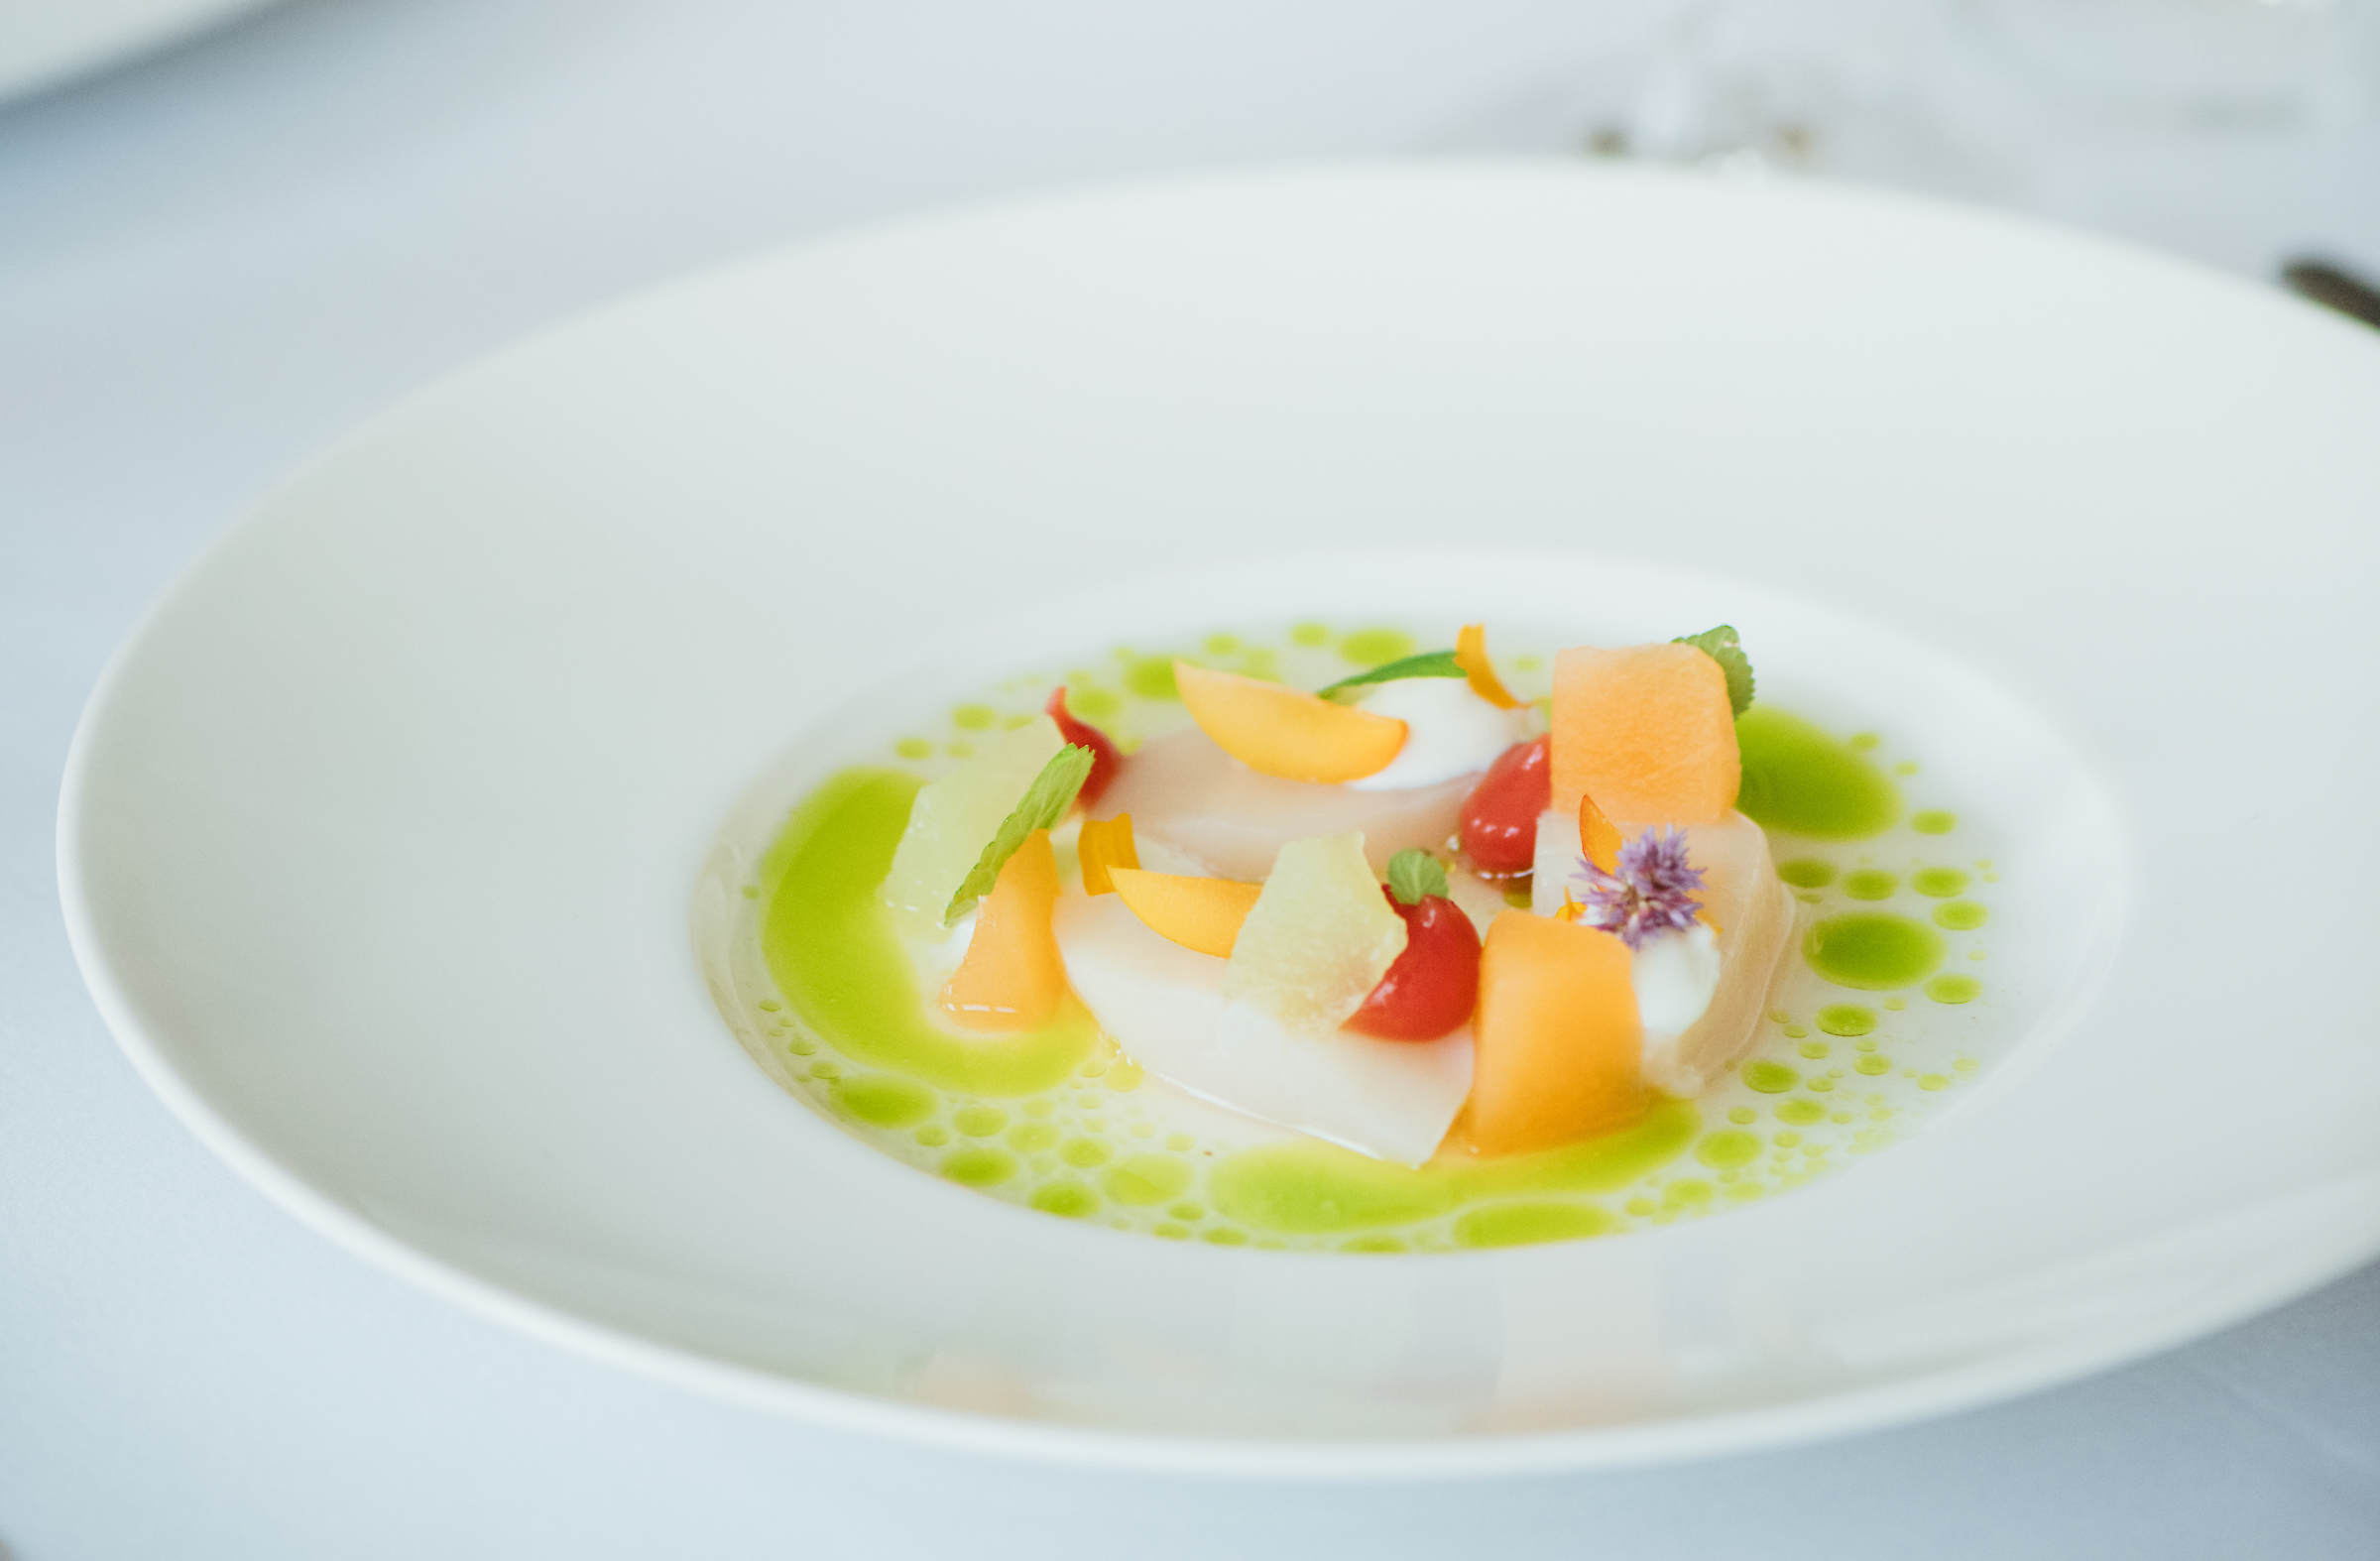 A plate of scallops with melon